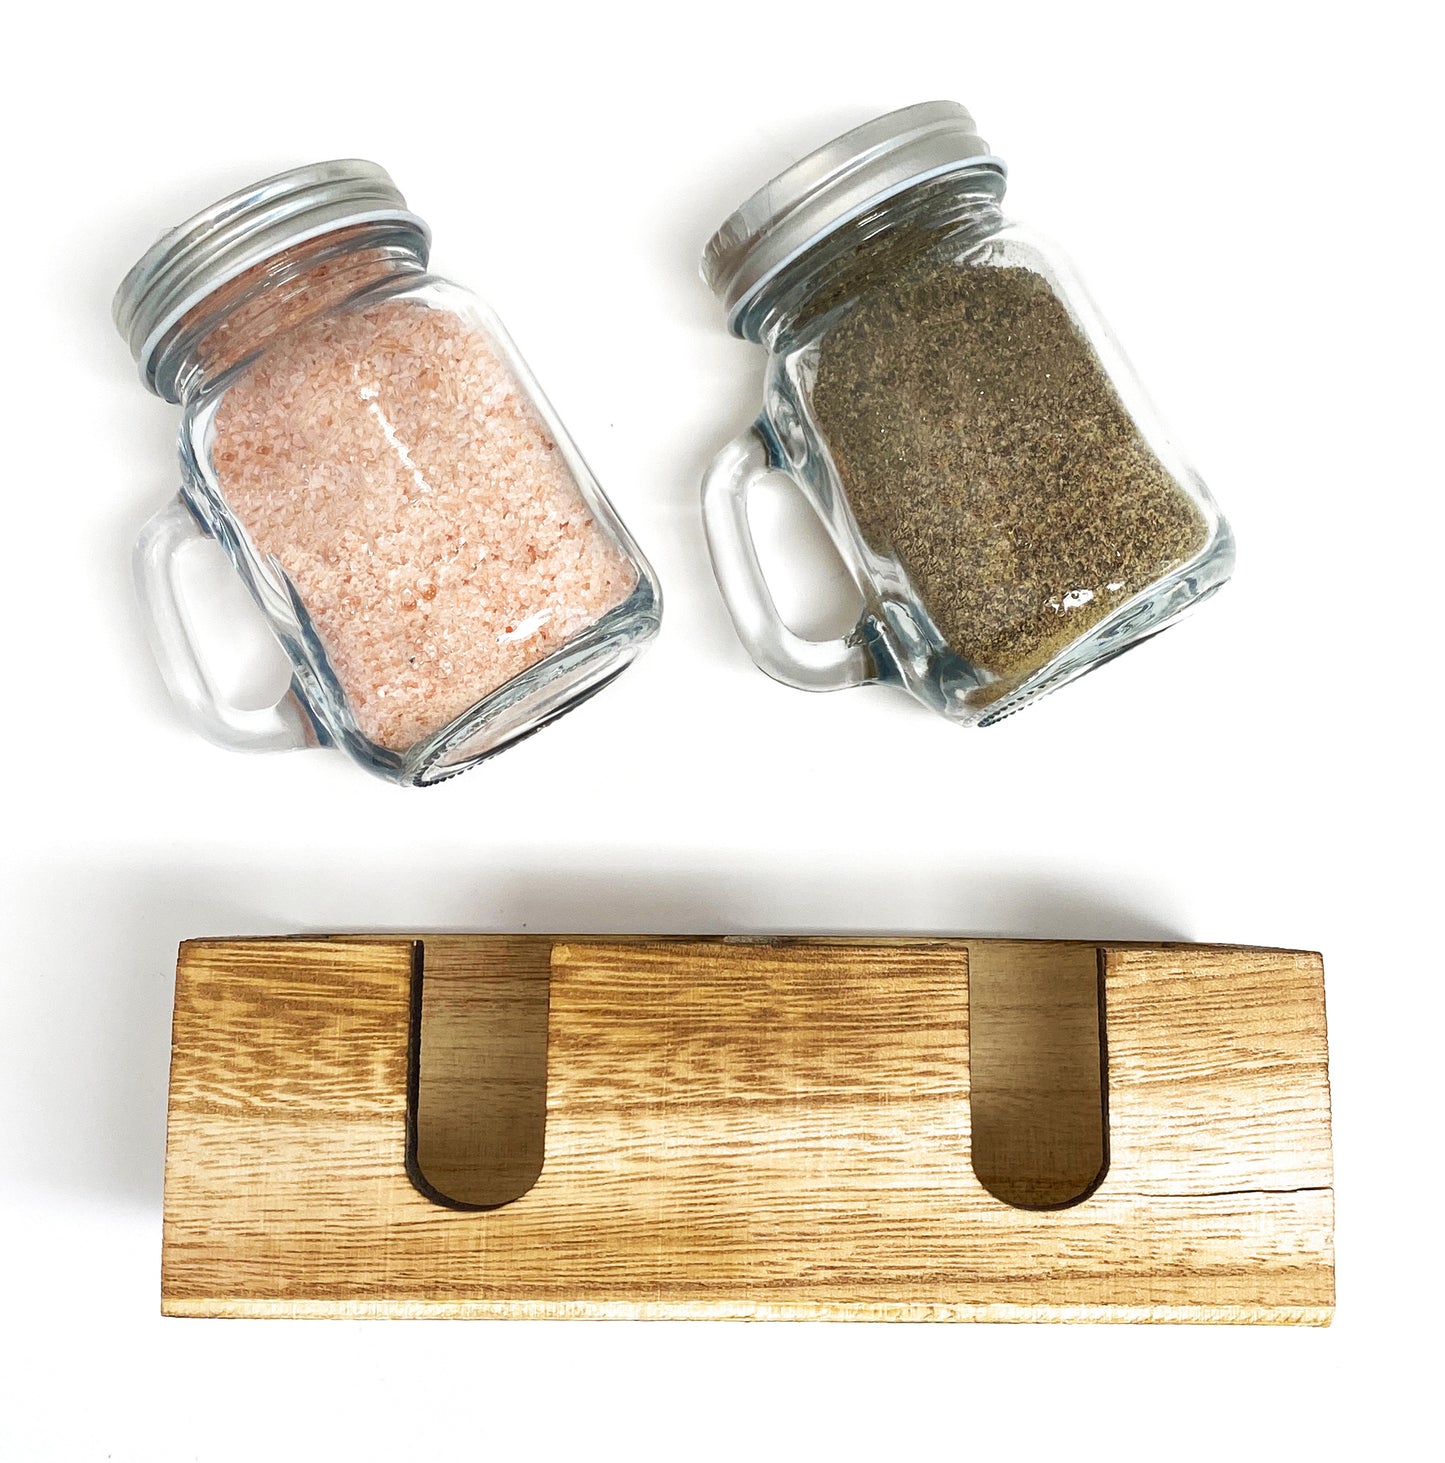 Mason Jar Salt and Pepper Shakers Set with Wood Caddy, Easy to Clean & Refill for Farmhouse Rustic Kitchen